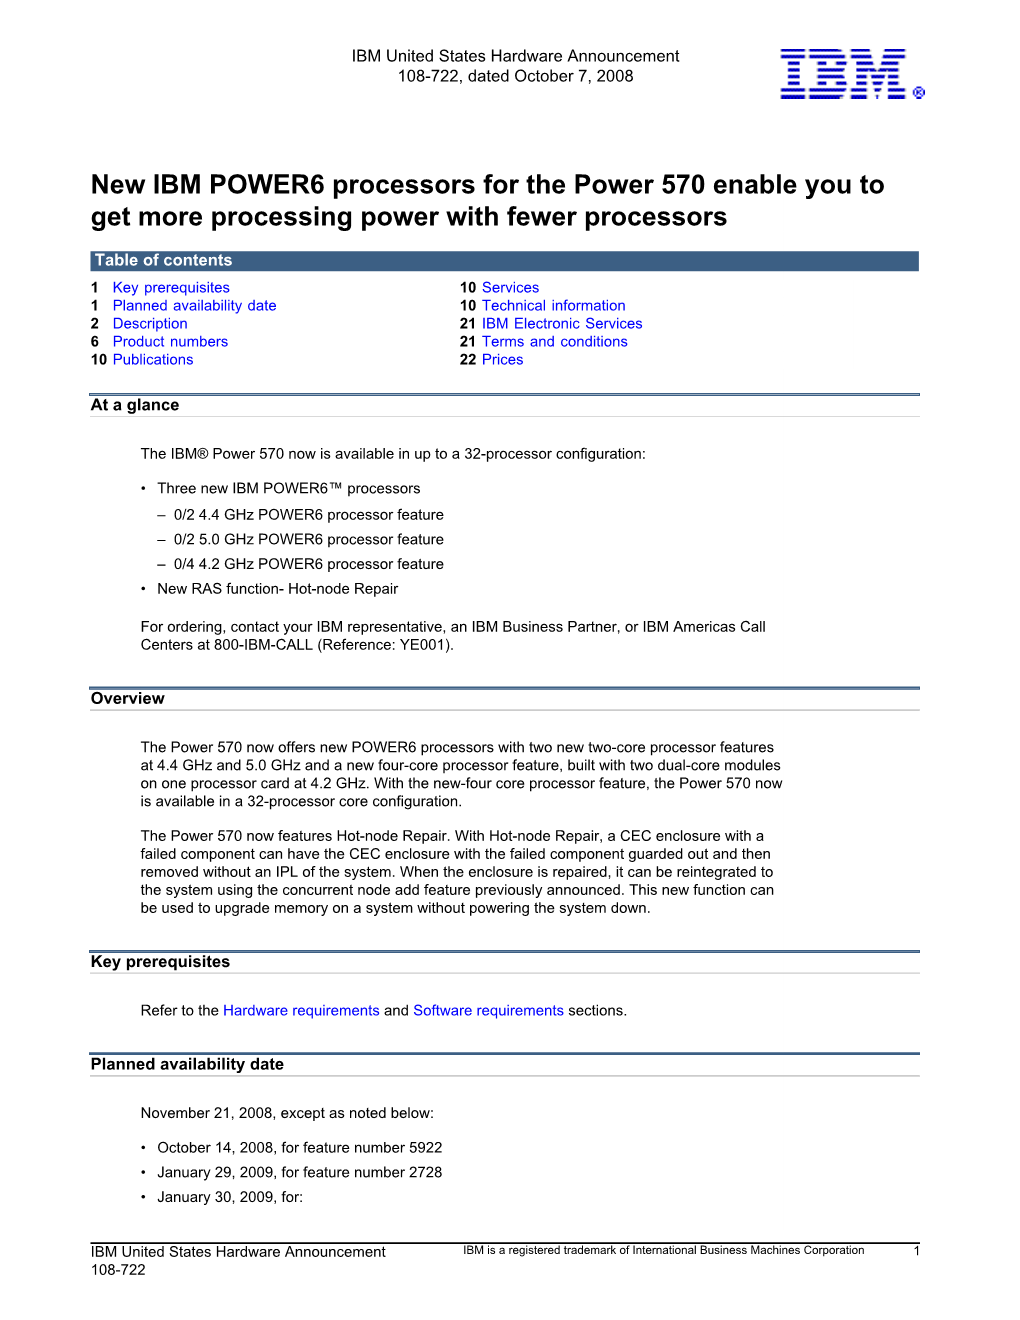 New IBM POWER6 Processors for the Power 570 Enable You to Get More Processing Power with Fewer Processors